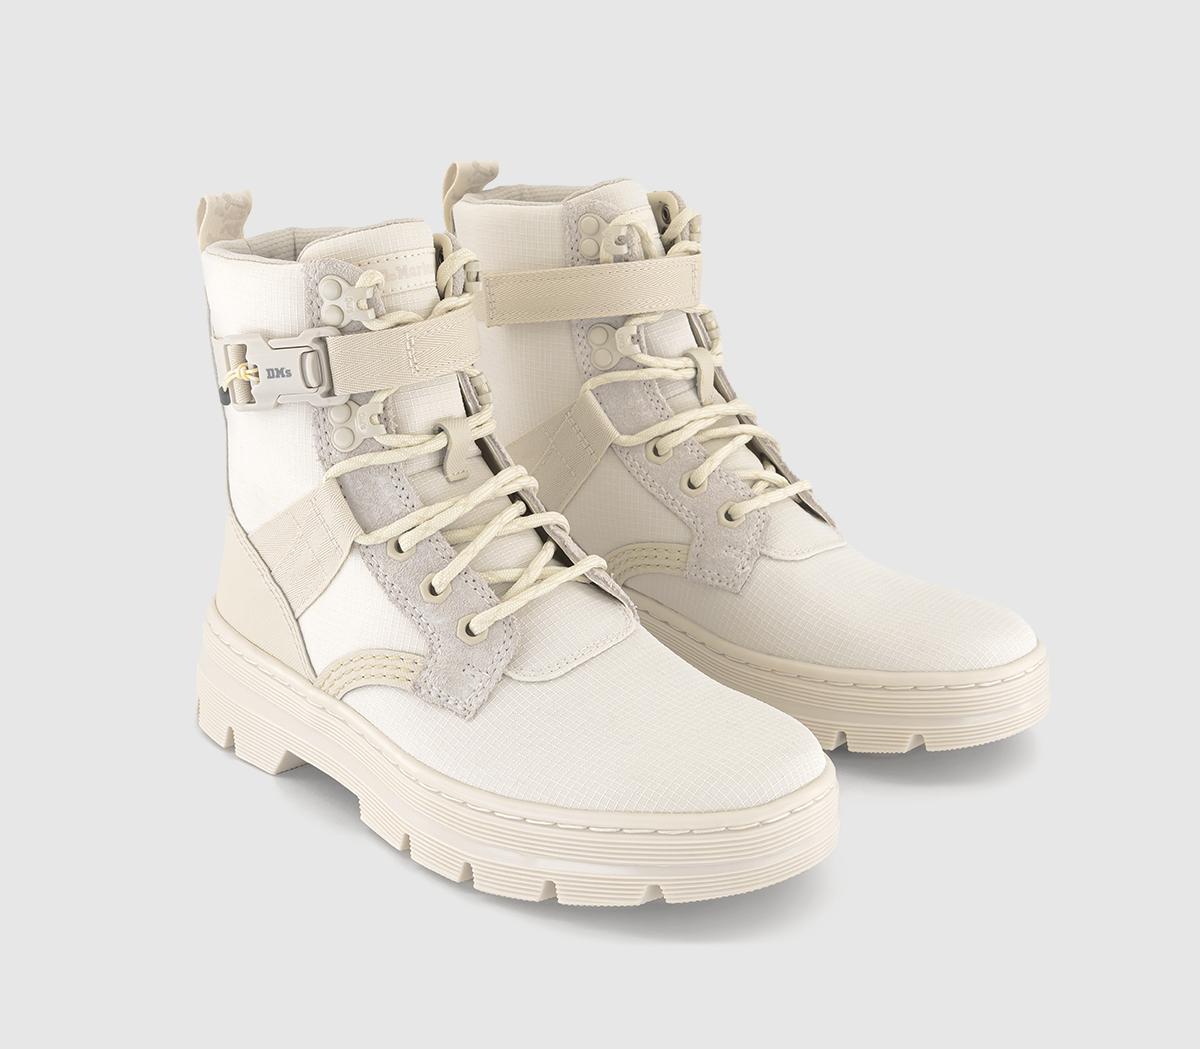 Dr. Martens Womens Combs Tech Ii Boots Off White Poly Ripstop, 6